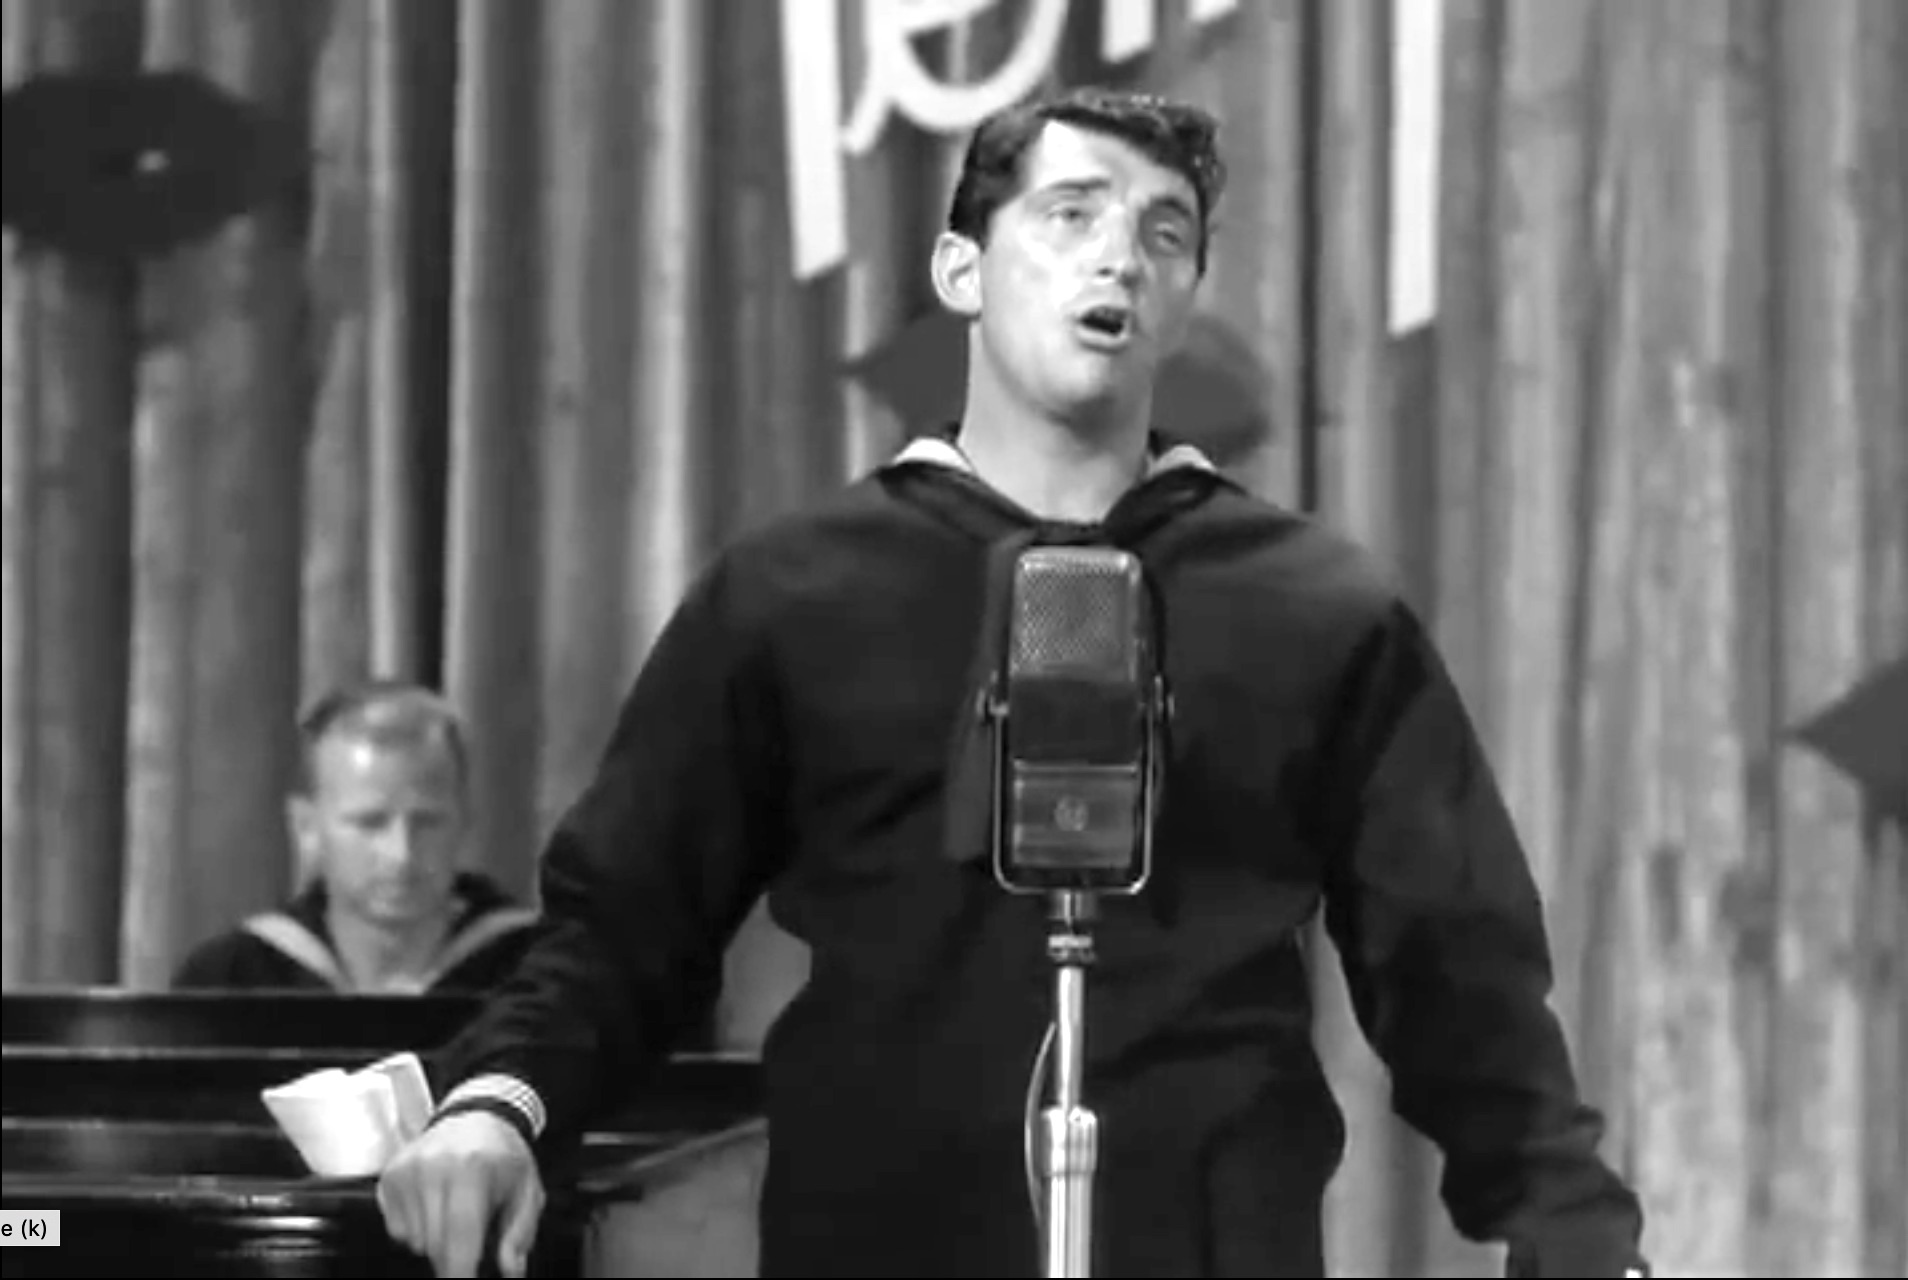 Song lyrics to Never Before, Lyrics by Mack David, Music by Jerry Livingston. Performed by Dean Martin in Sailor Beware